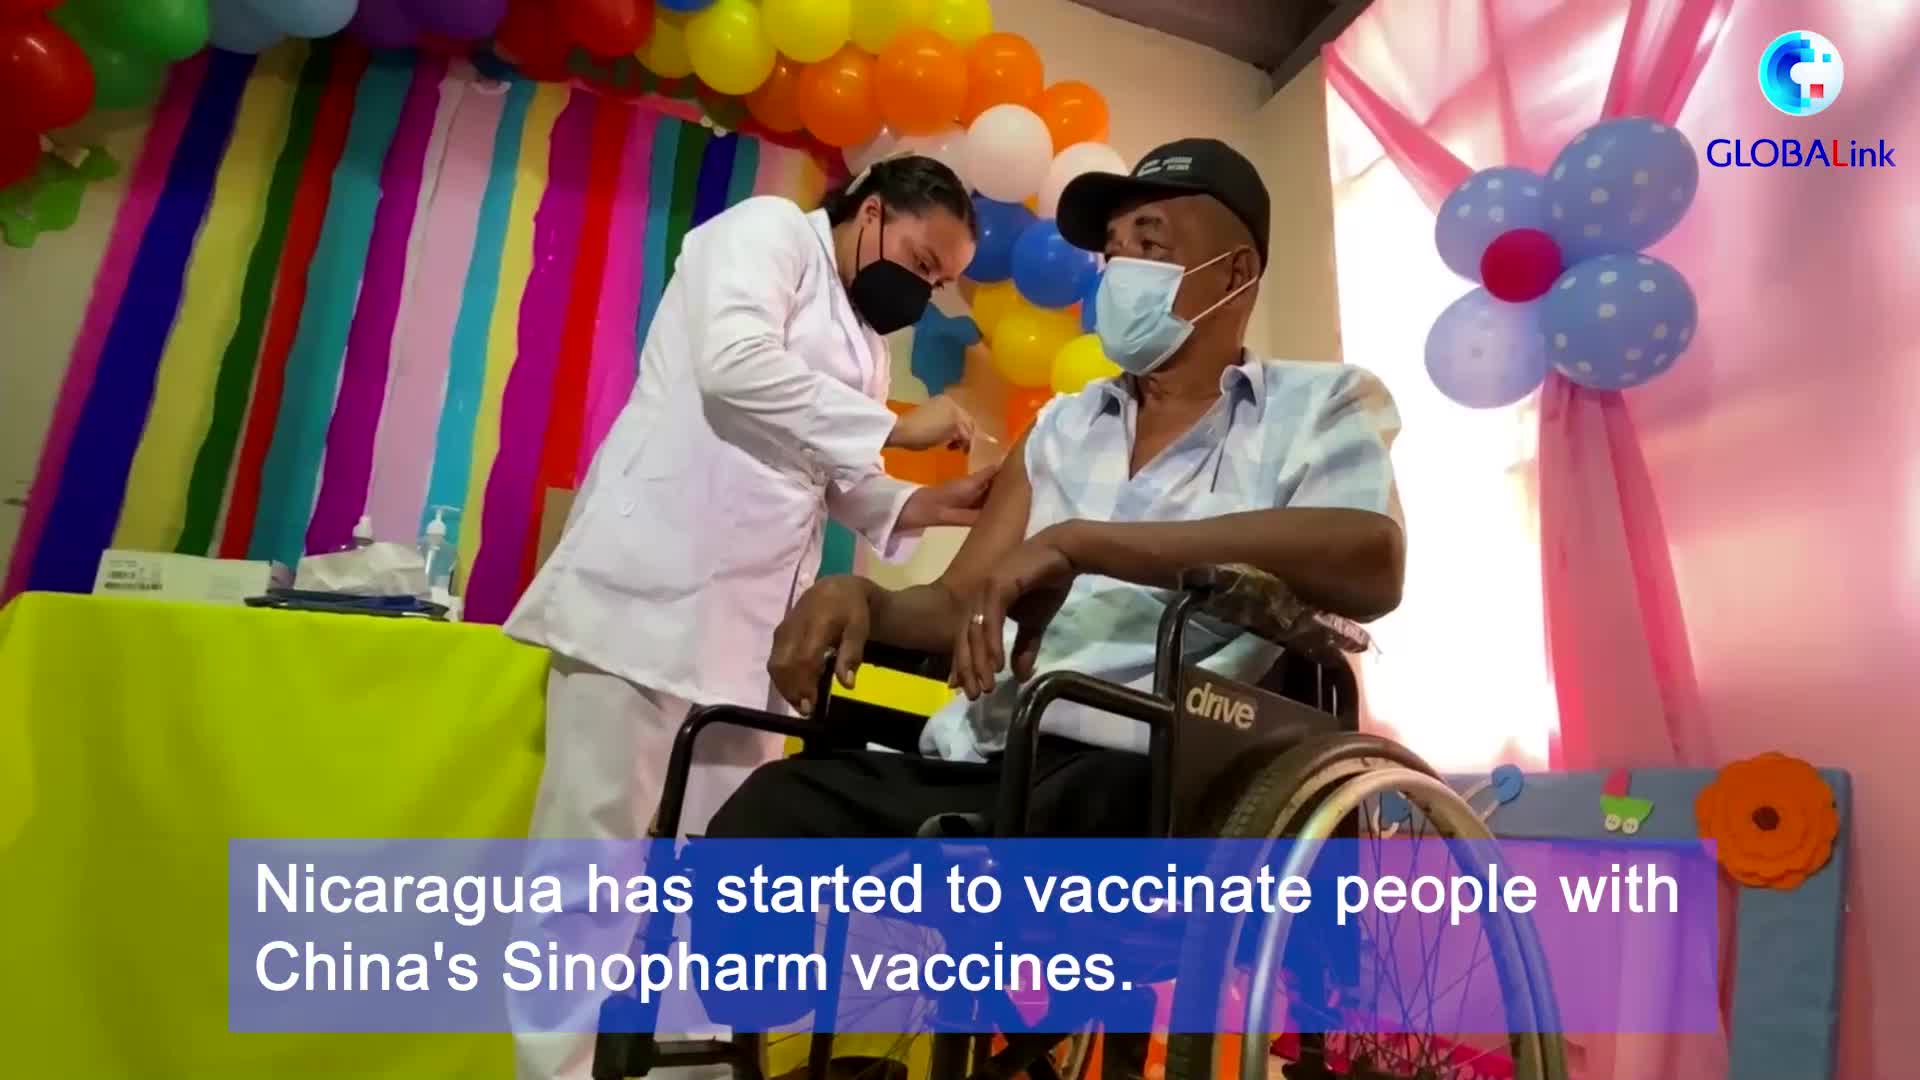 GLOBALink | Nicaragua starts to vaccinate people with China's Sinopharm vaccines